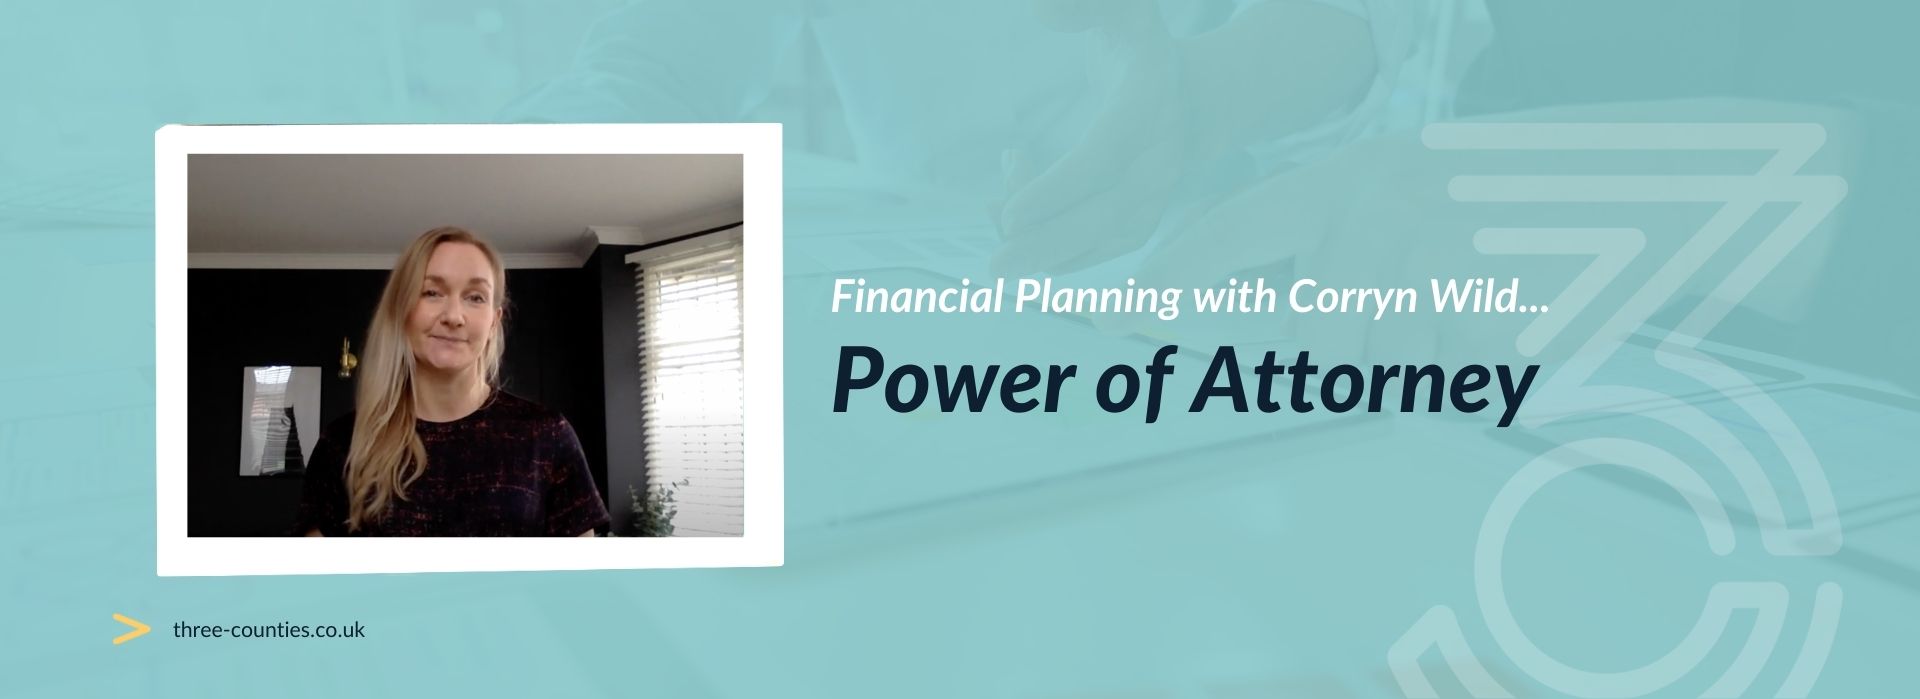 Three Counties - Financial Planning - Power of Attorney